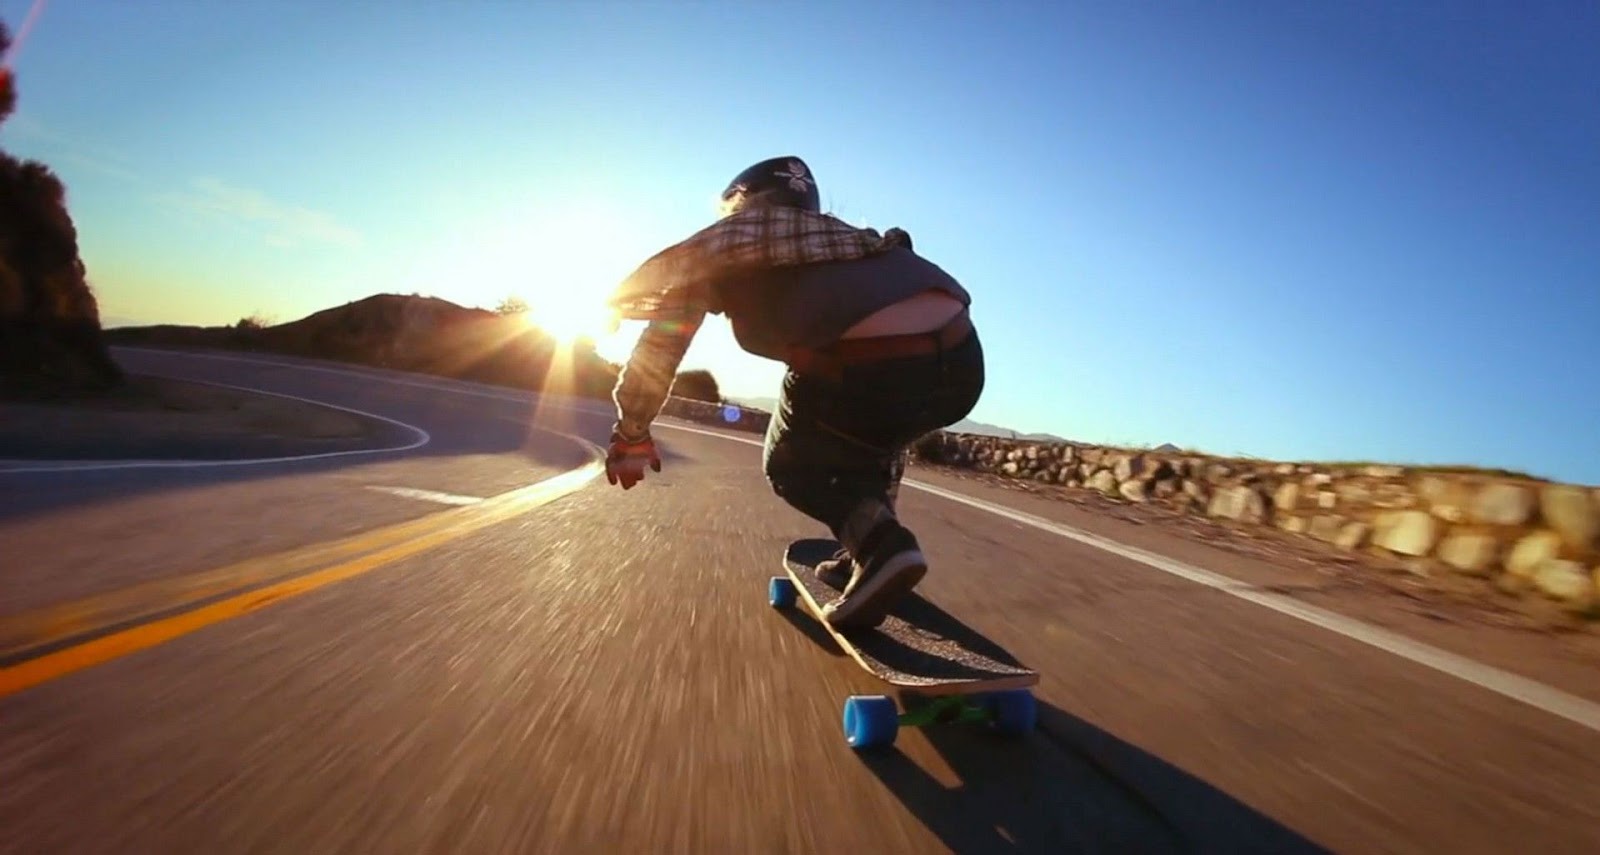 Carving is the primary discipline in skateboarding